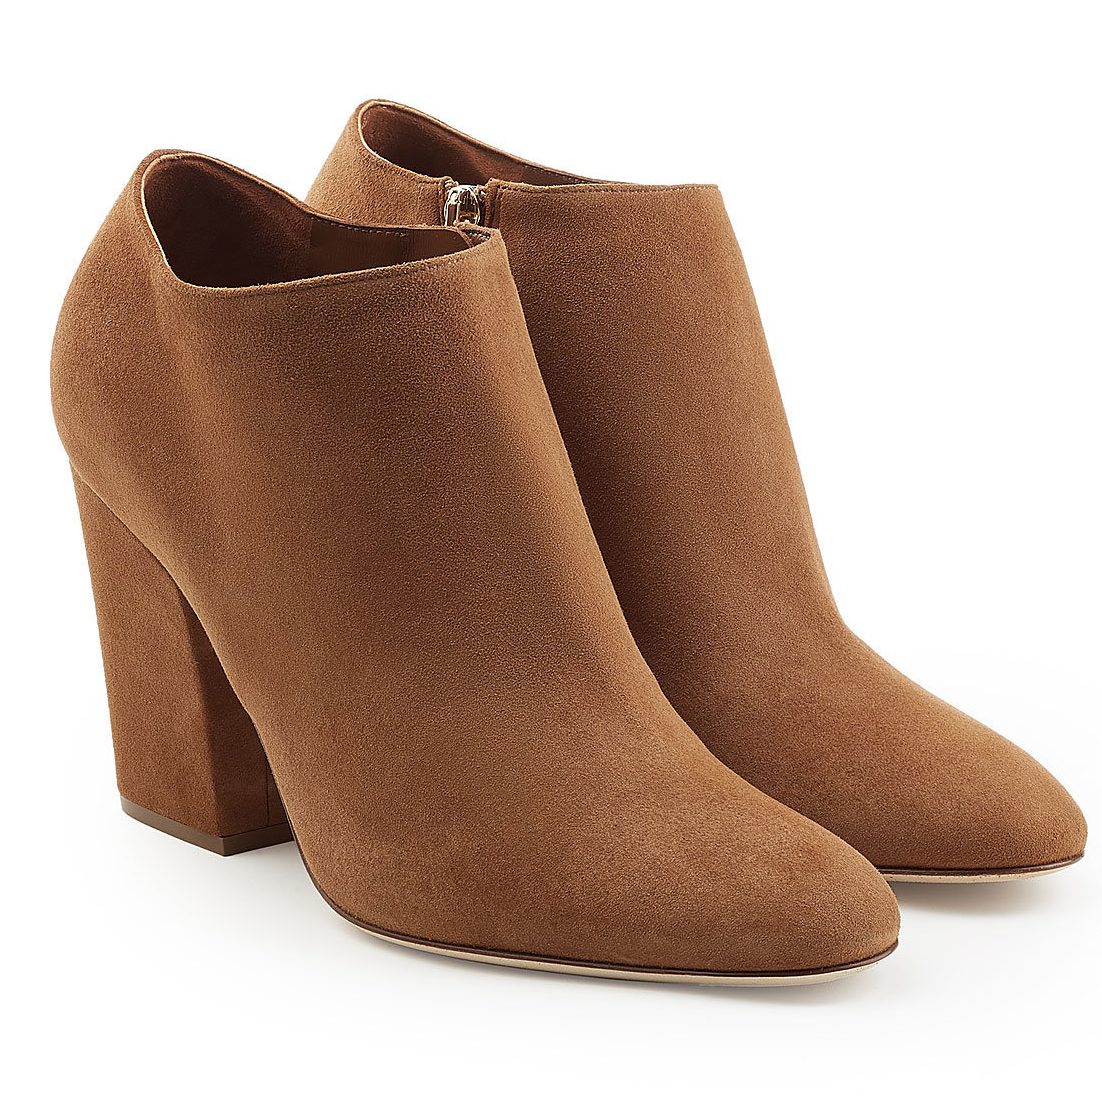 Sergio Rossi brown suede ankle boots